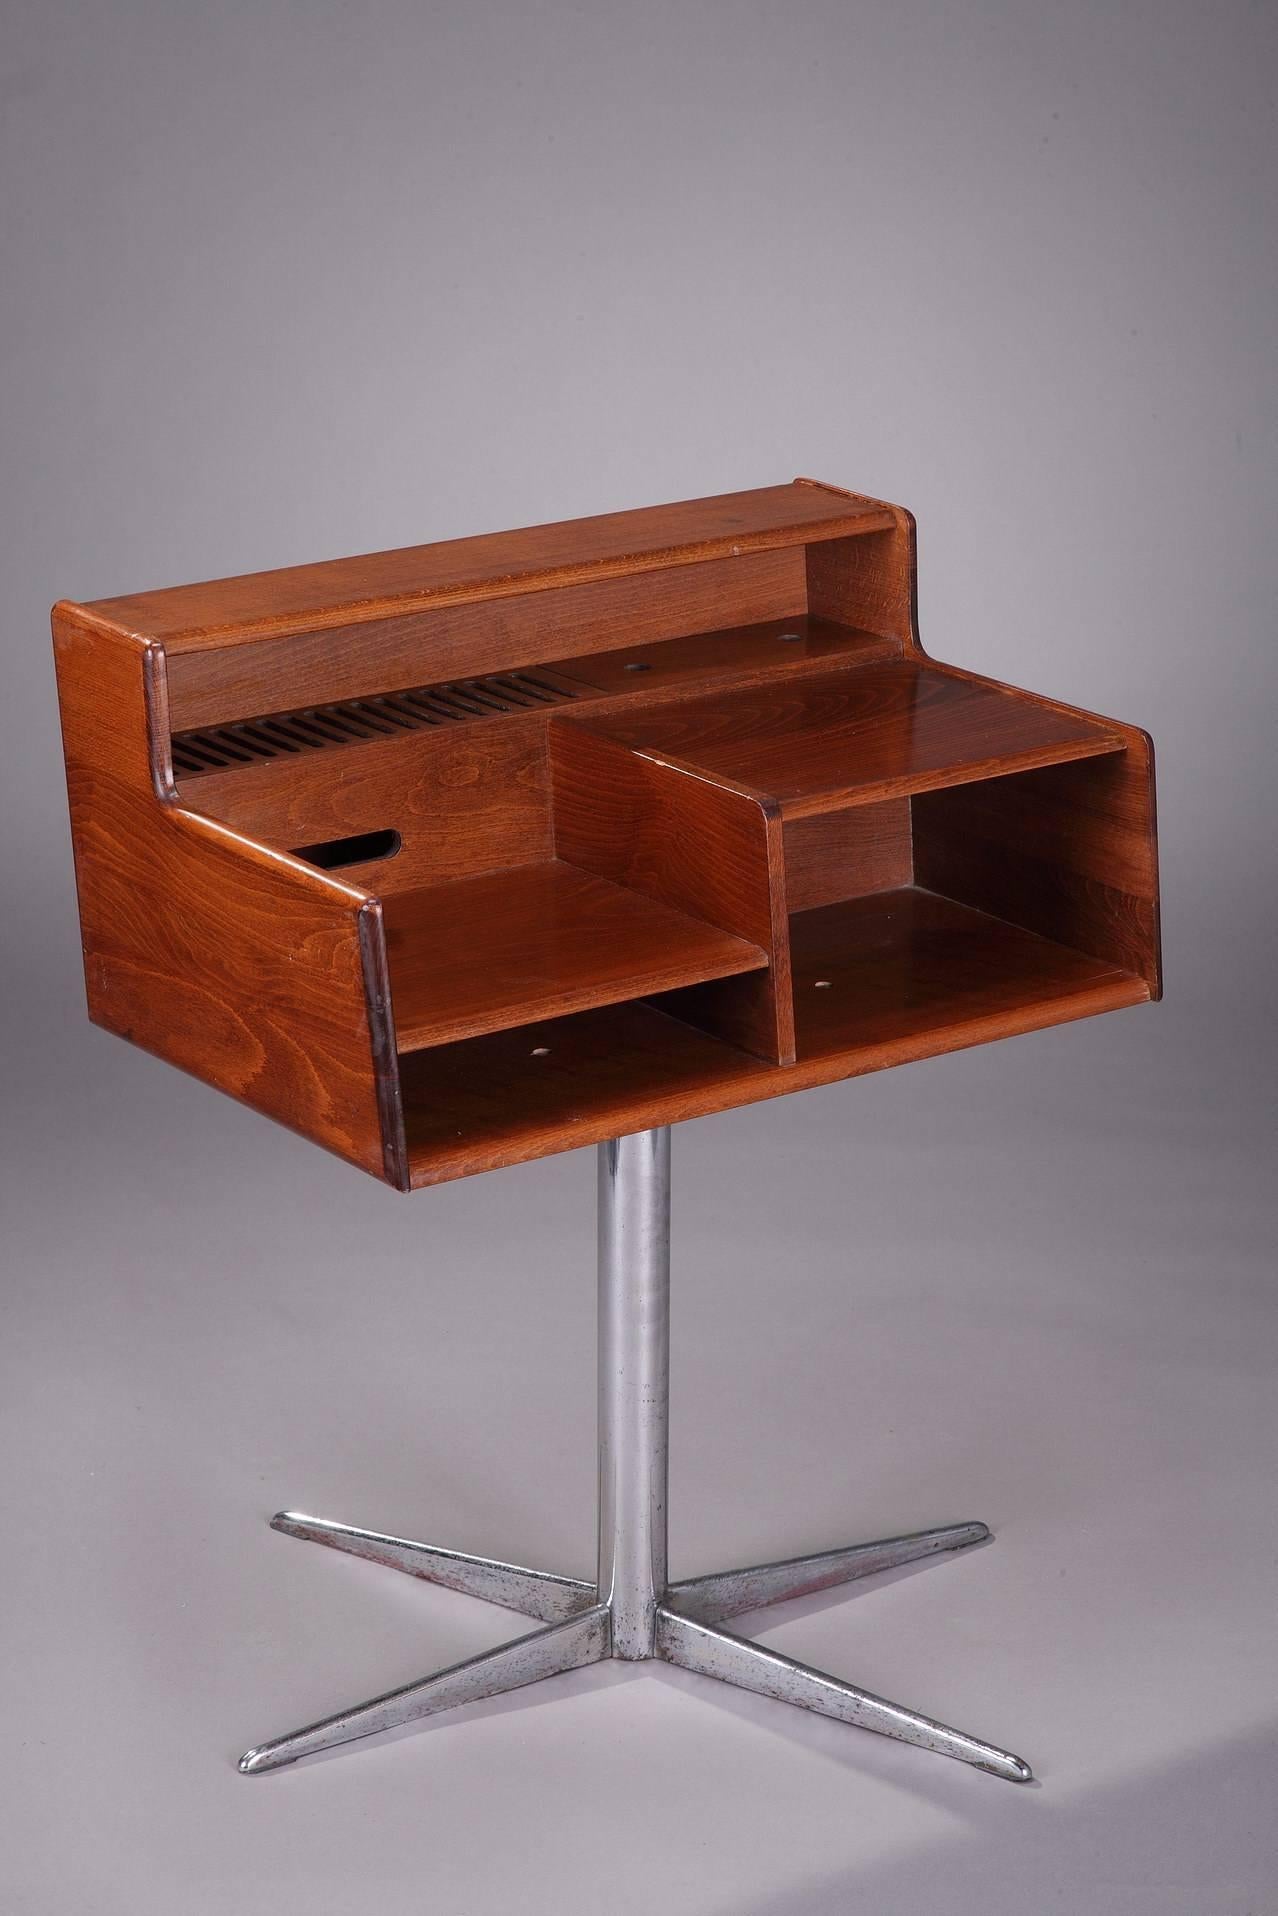 Midcentury Italian swivel console in exotic wood on chromed metal leg, manufactured by FIMSA in the 1960s. Can be used as end table, desk or nightstand. It is in good vintage condition.


circa 1960
Dimnesion: W 24.4 in,  D 15.4in, H